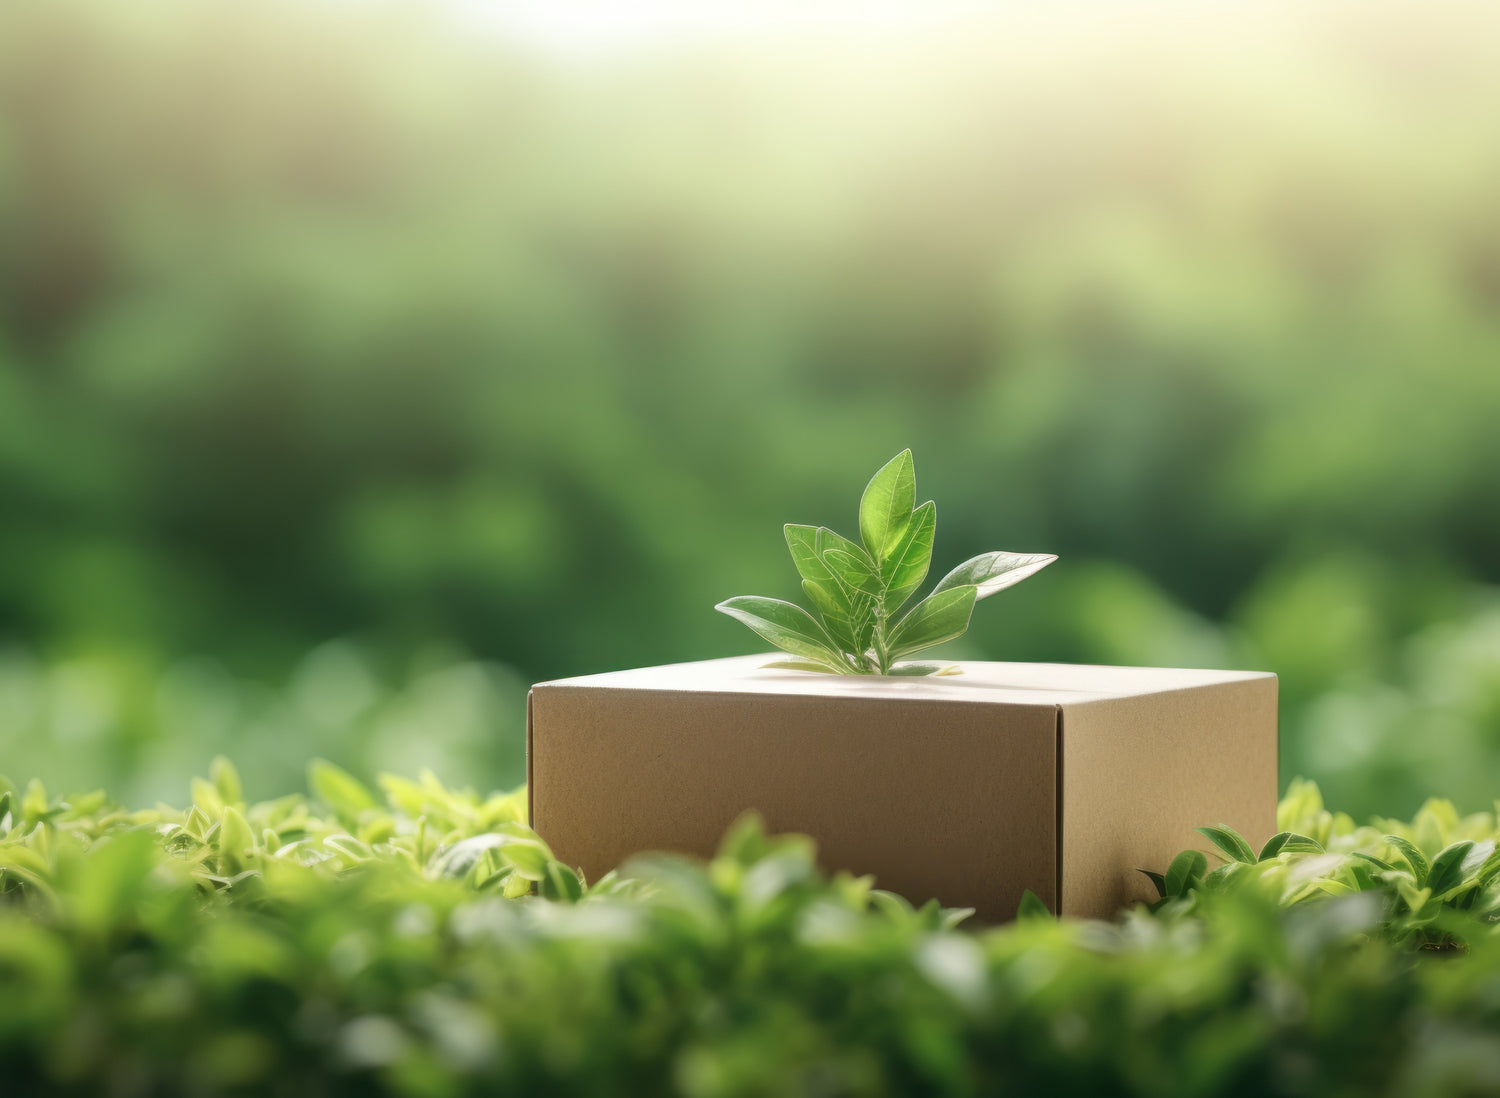 The Role of PCR Packaging in Eco-conscious Cannabis Sales